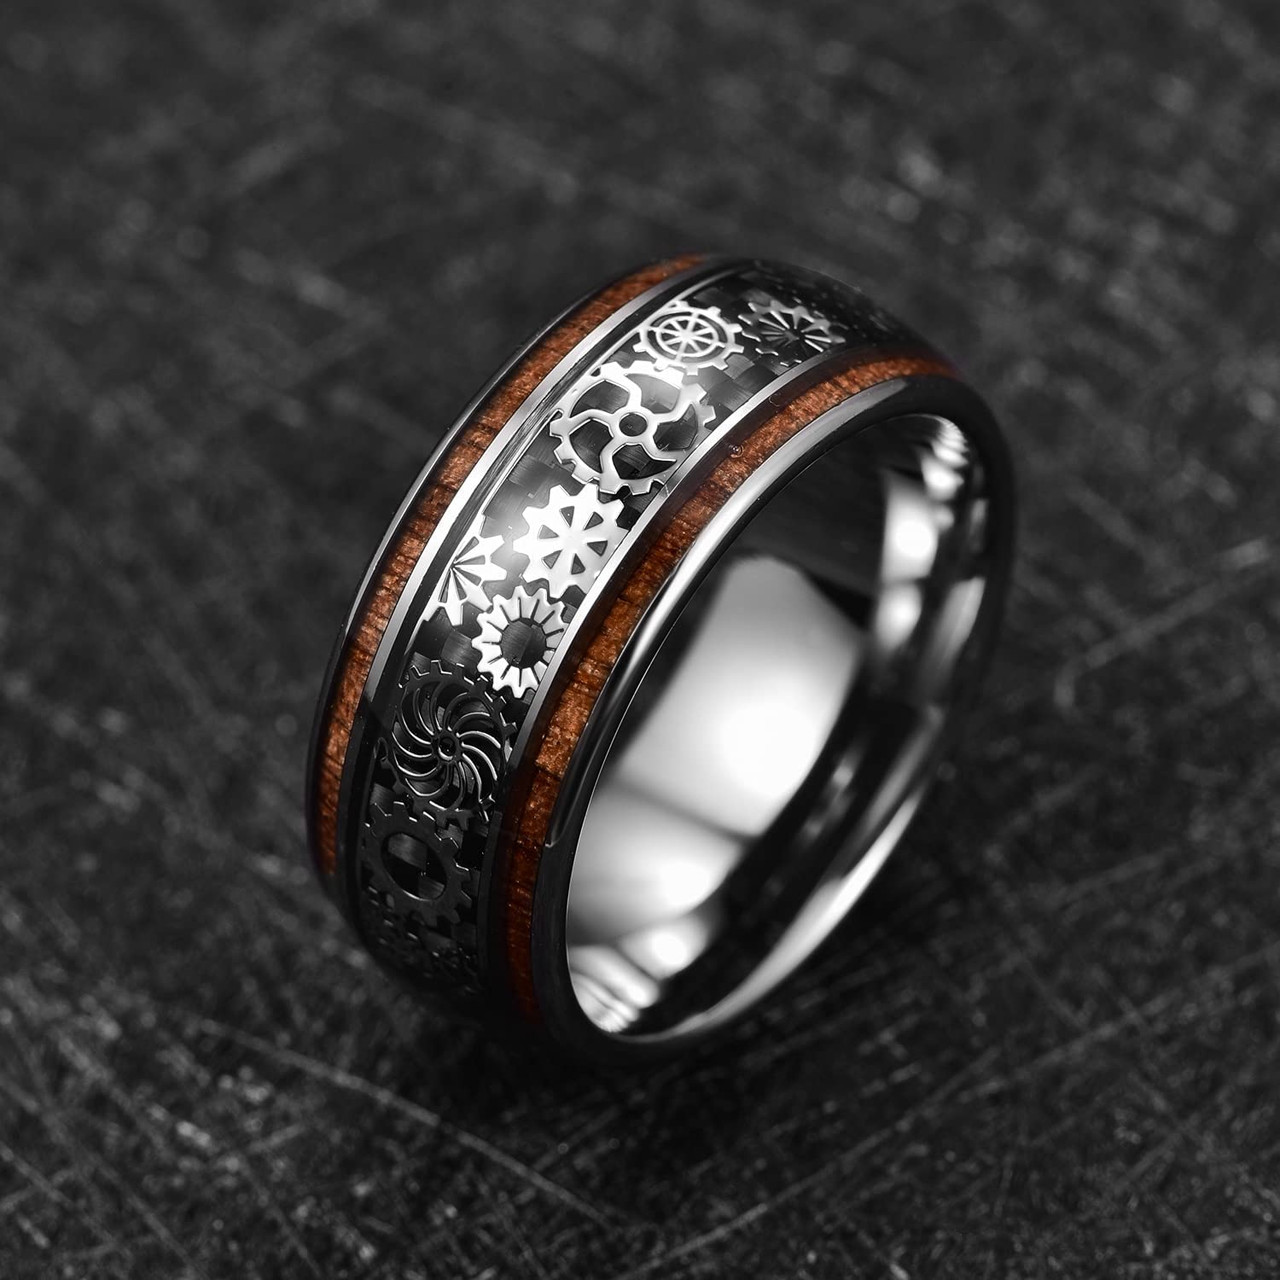 (8mm) Unisex or Men's Tungsten Carbide and Wood Wedding Ring Band. Silver Band with Silver and Wood Inlay with Watch Gear Inlay Design Over Black Carbon Fiber.